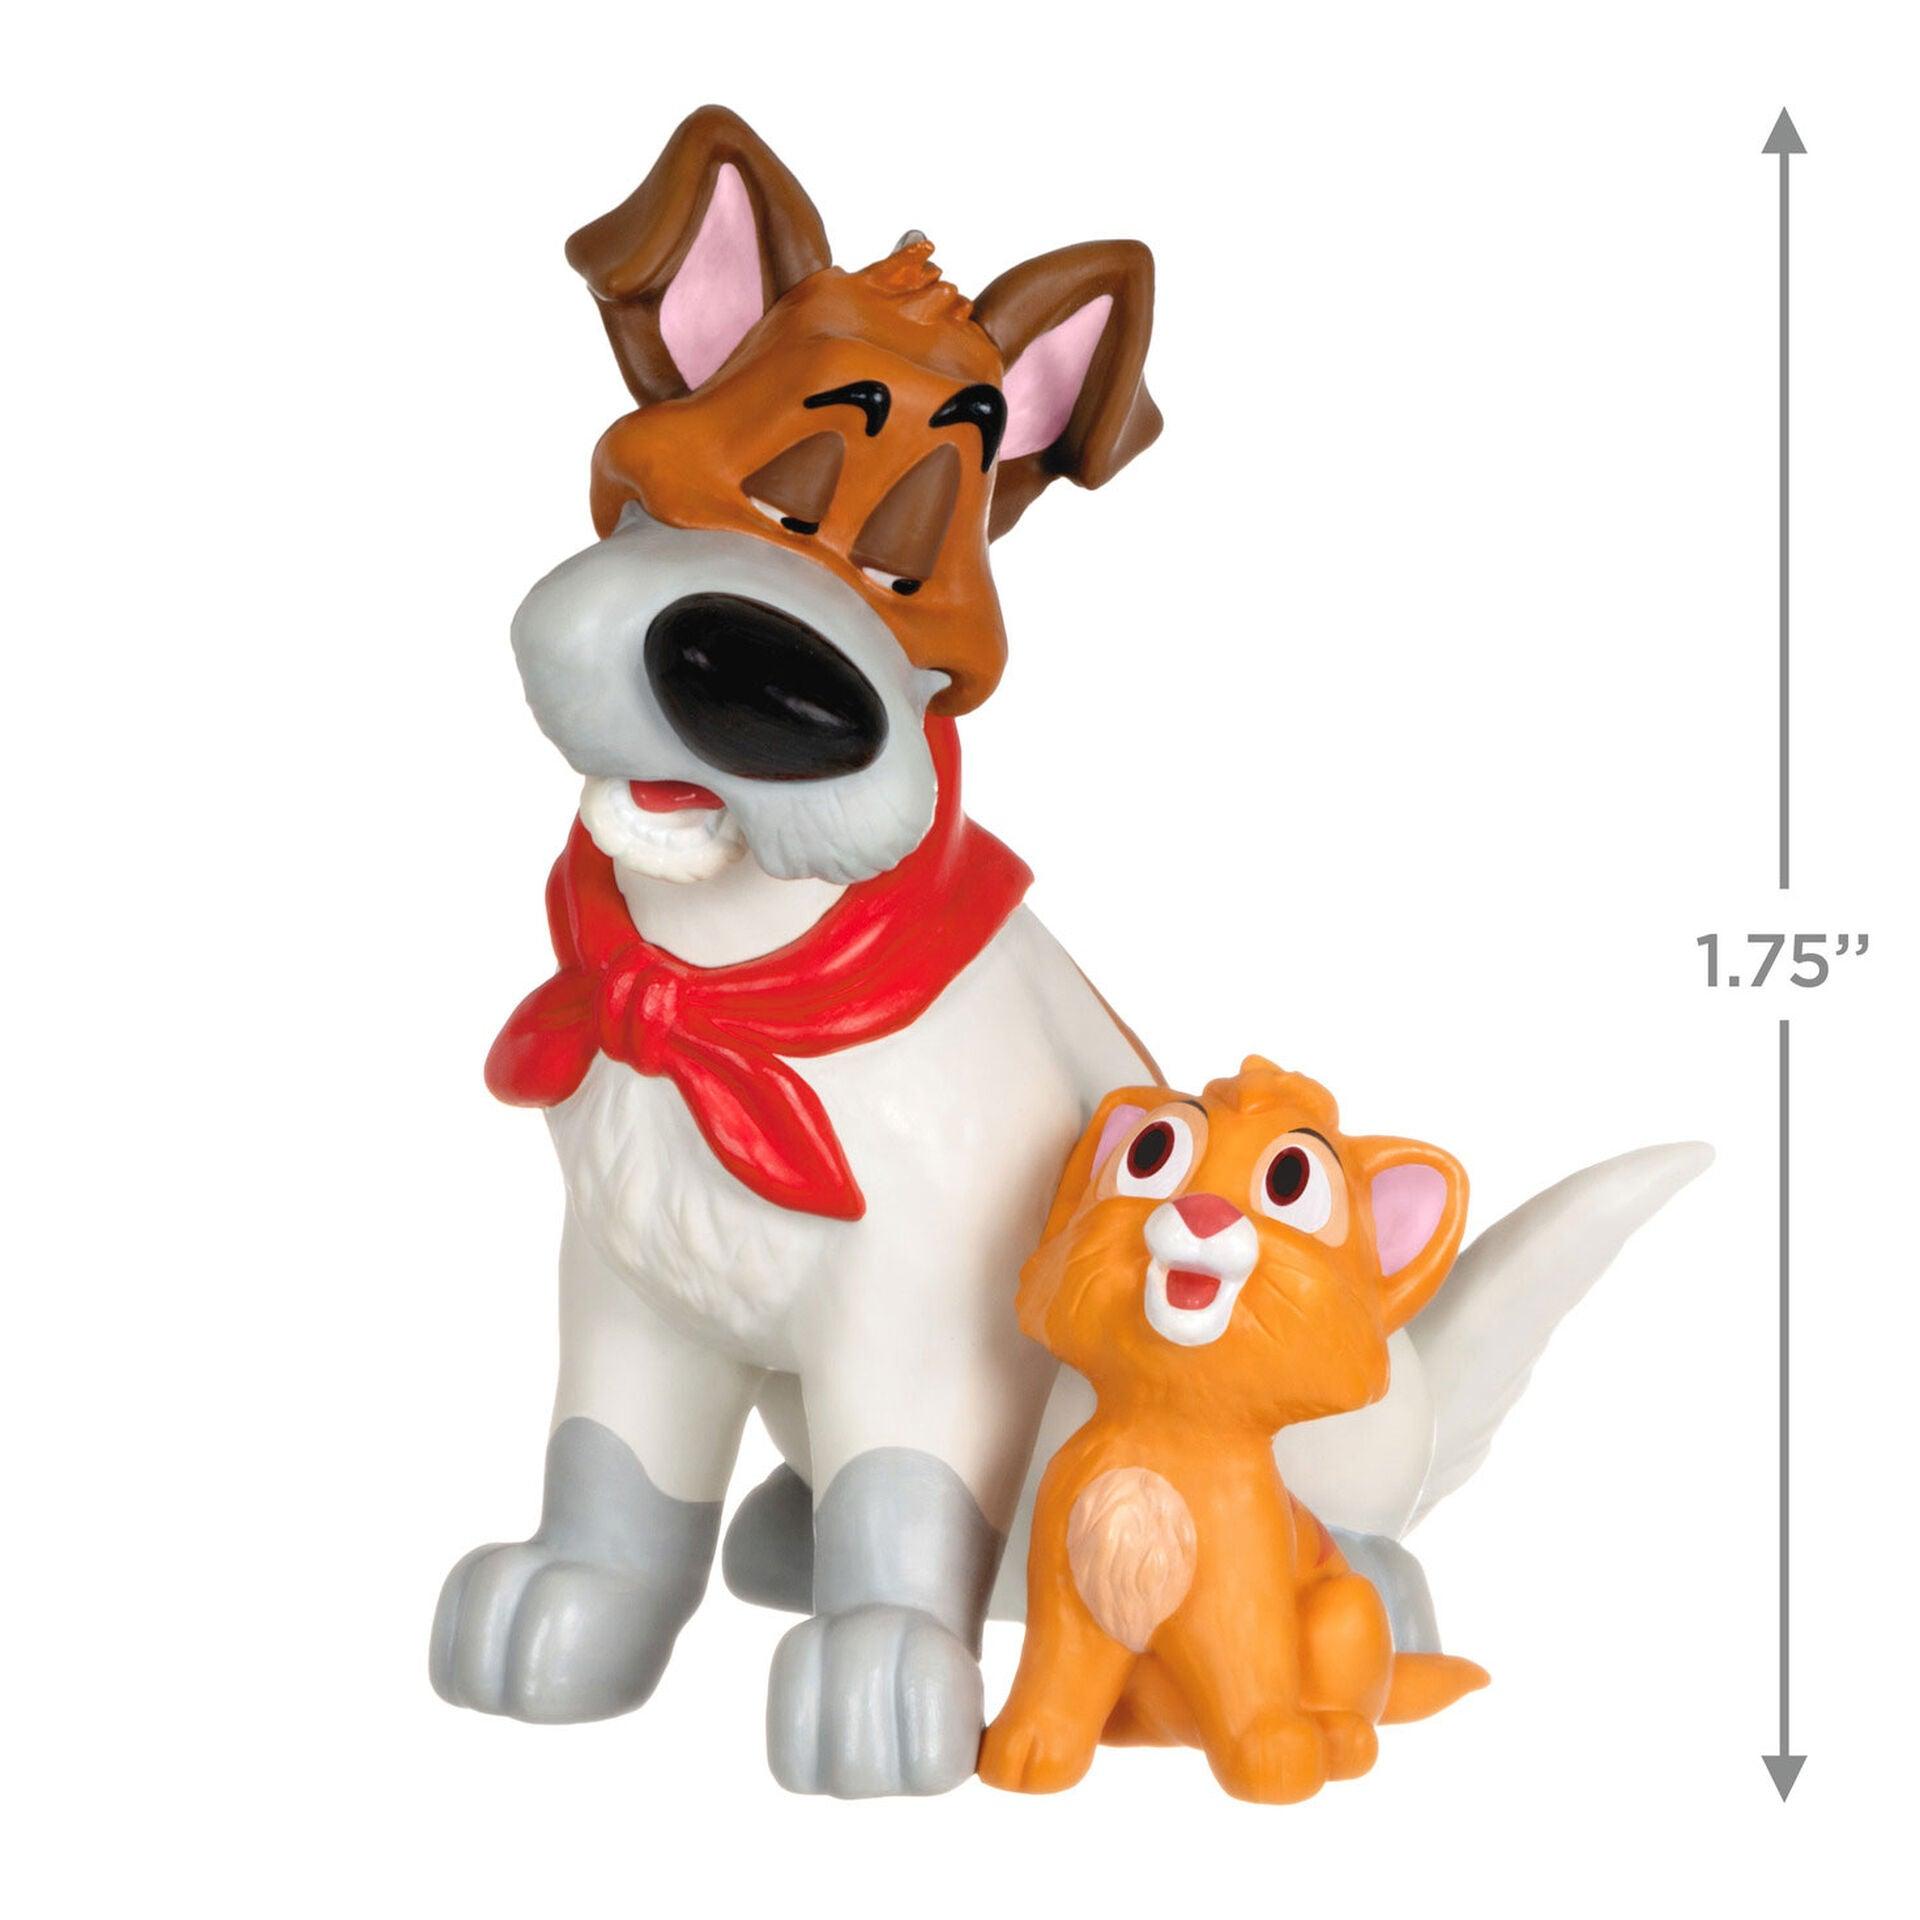 Disney Oliver and Company 35th Anniversary Oliver and Dodger Ornament